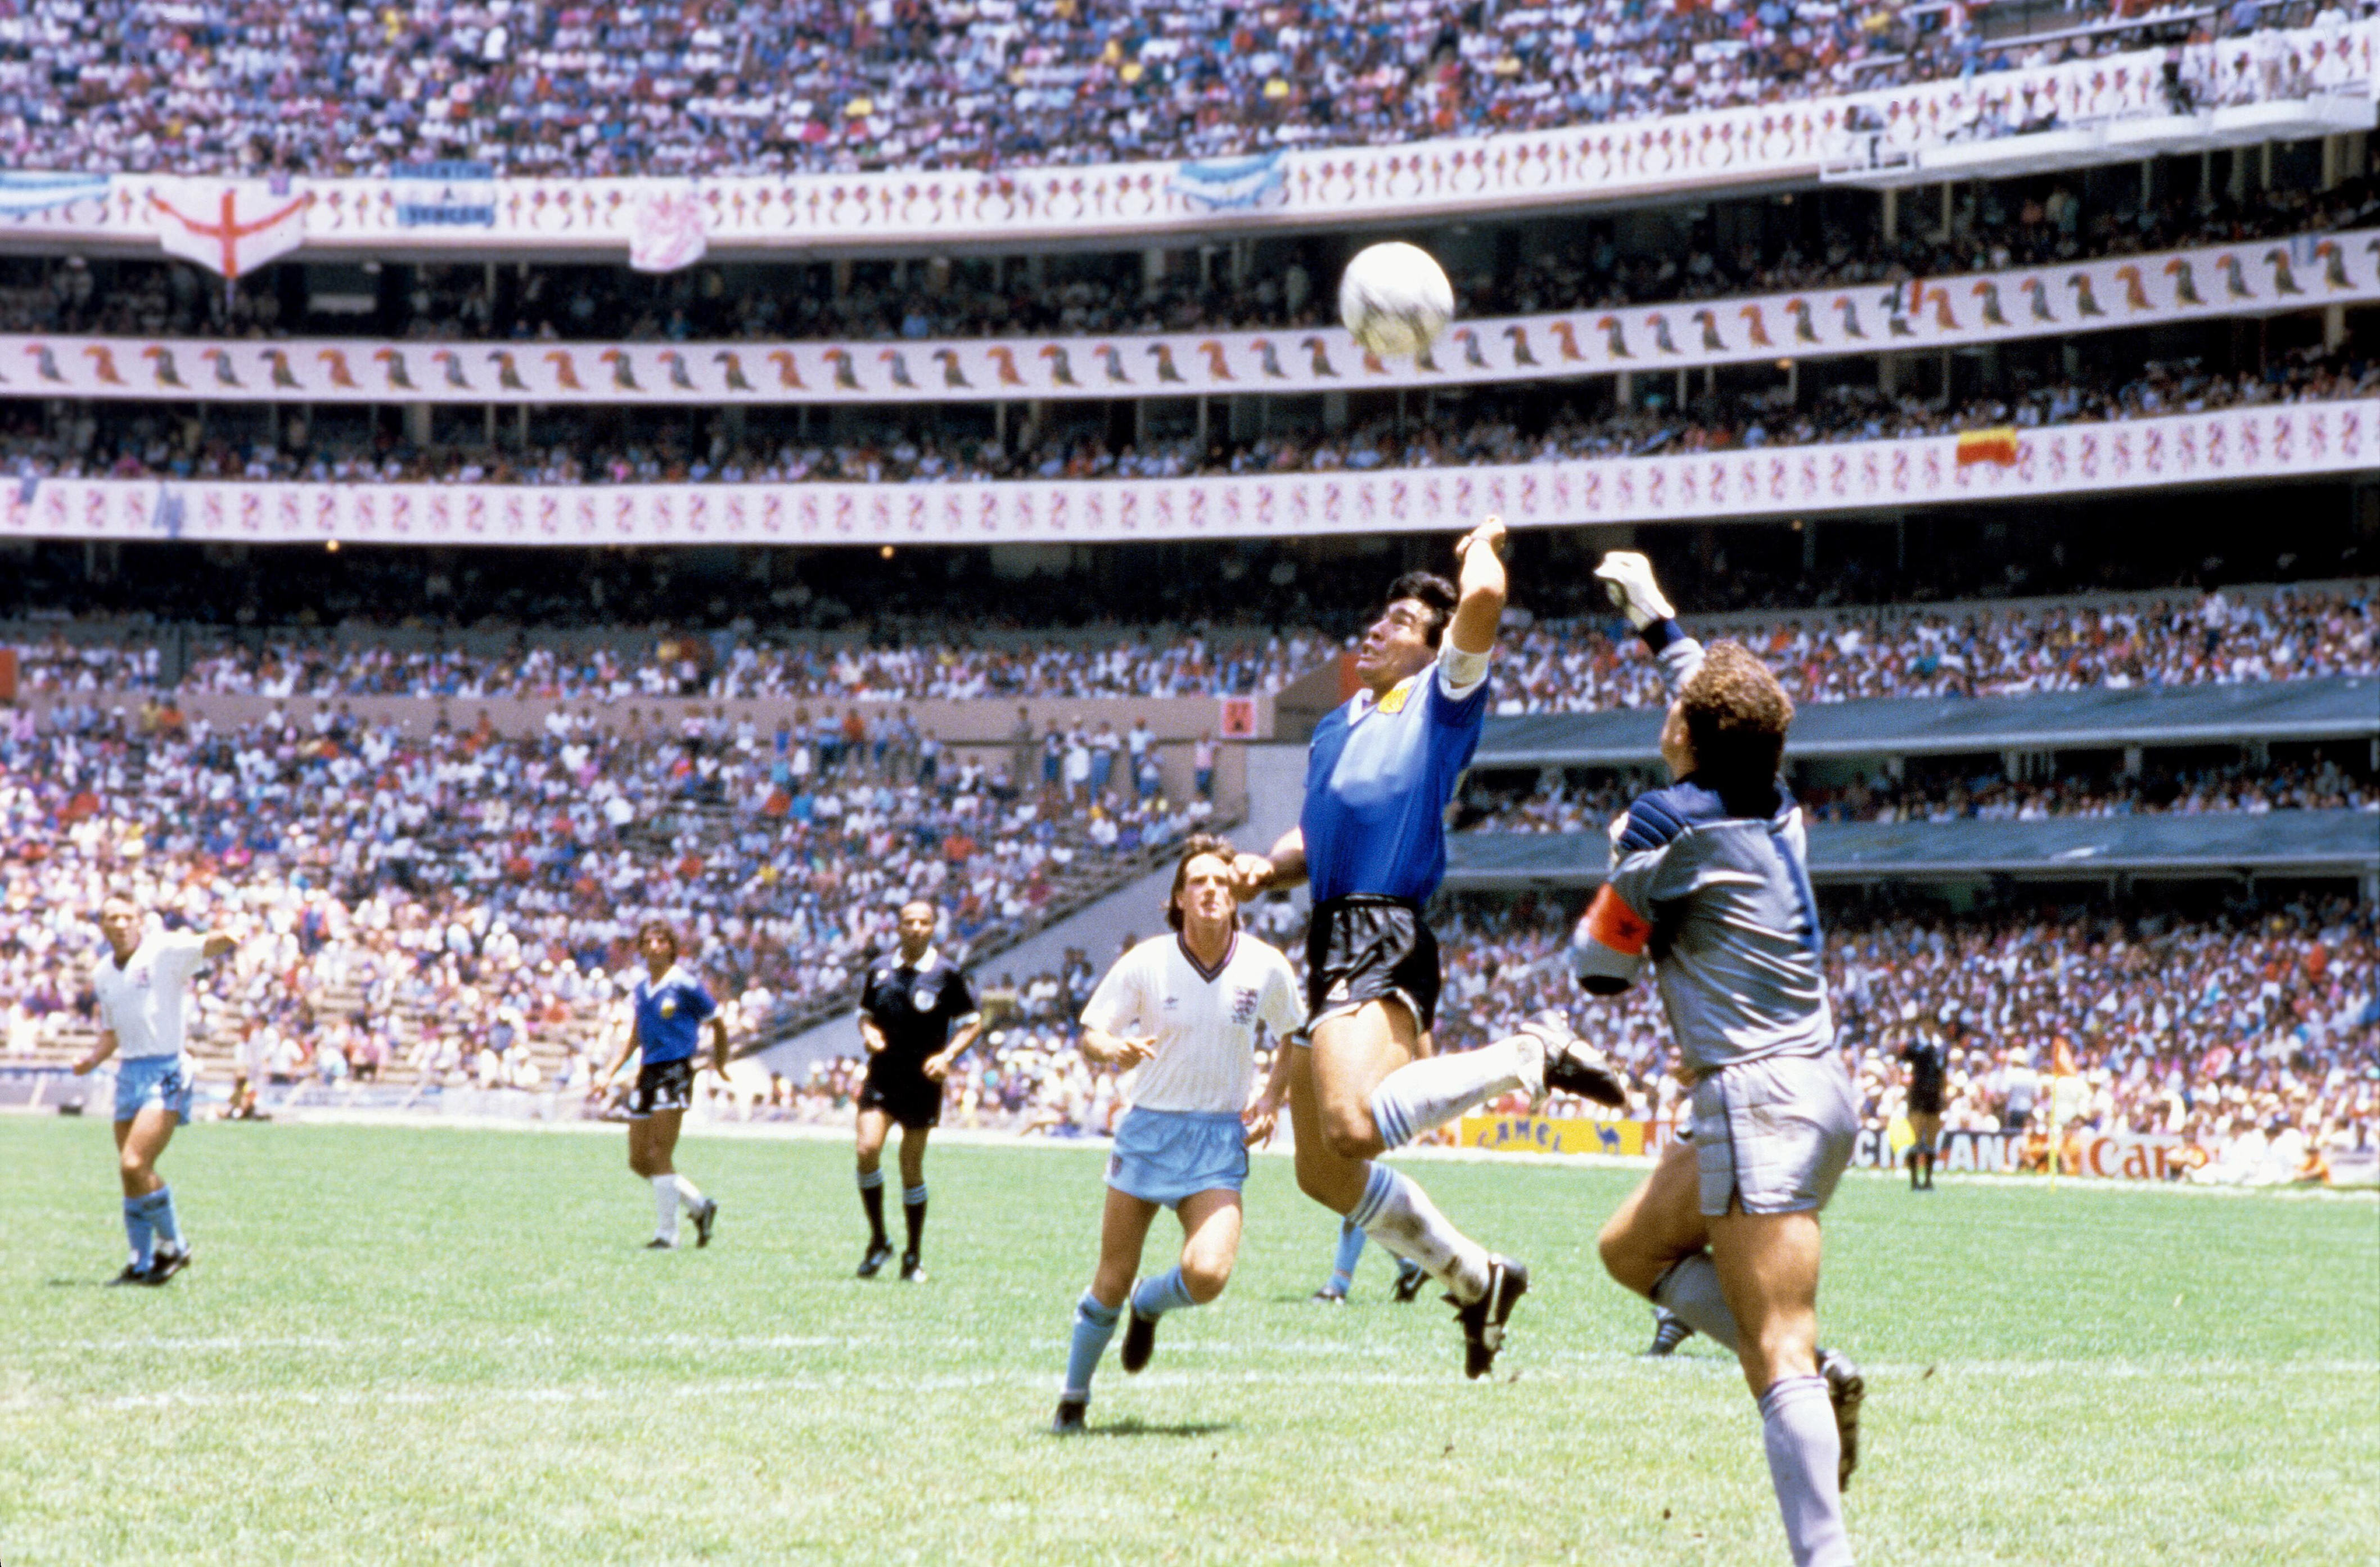 diego maradona's 1986 world cup golden ball to be auctioned